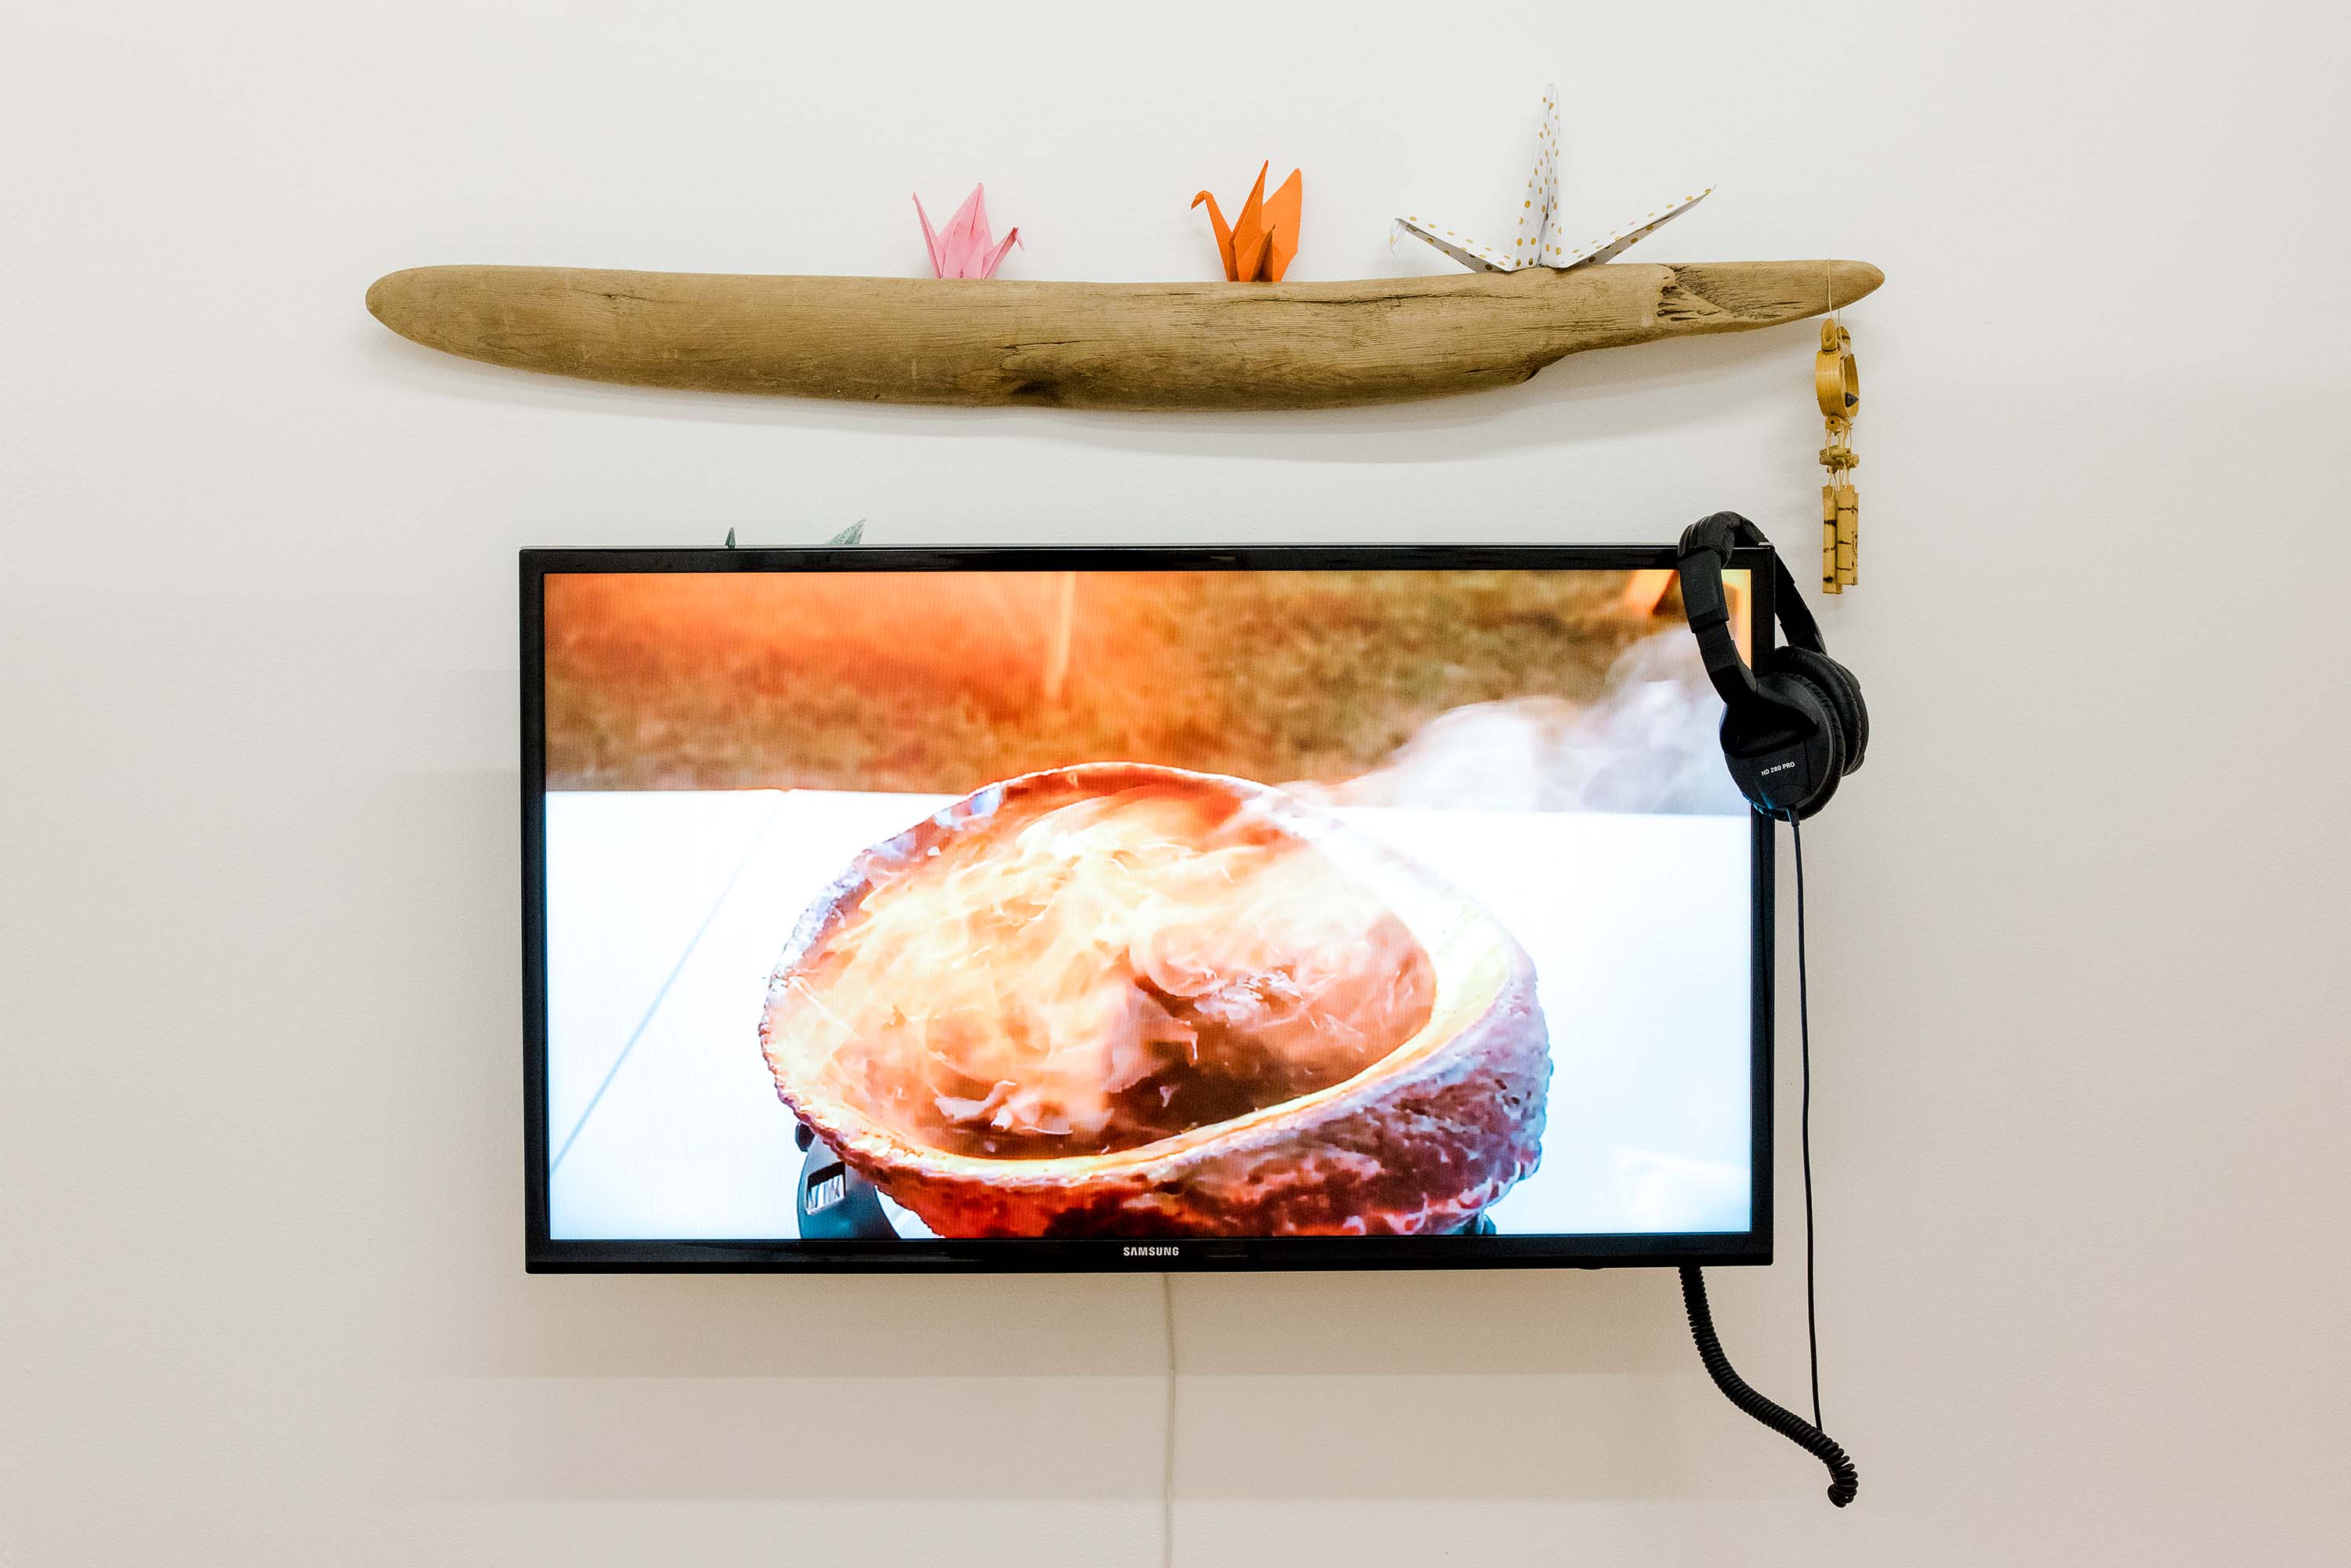 A television showing a small fire mounted below a piece of driftwood.